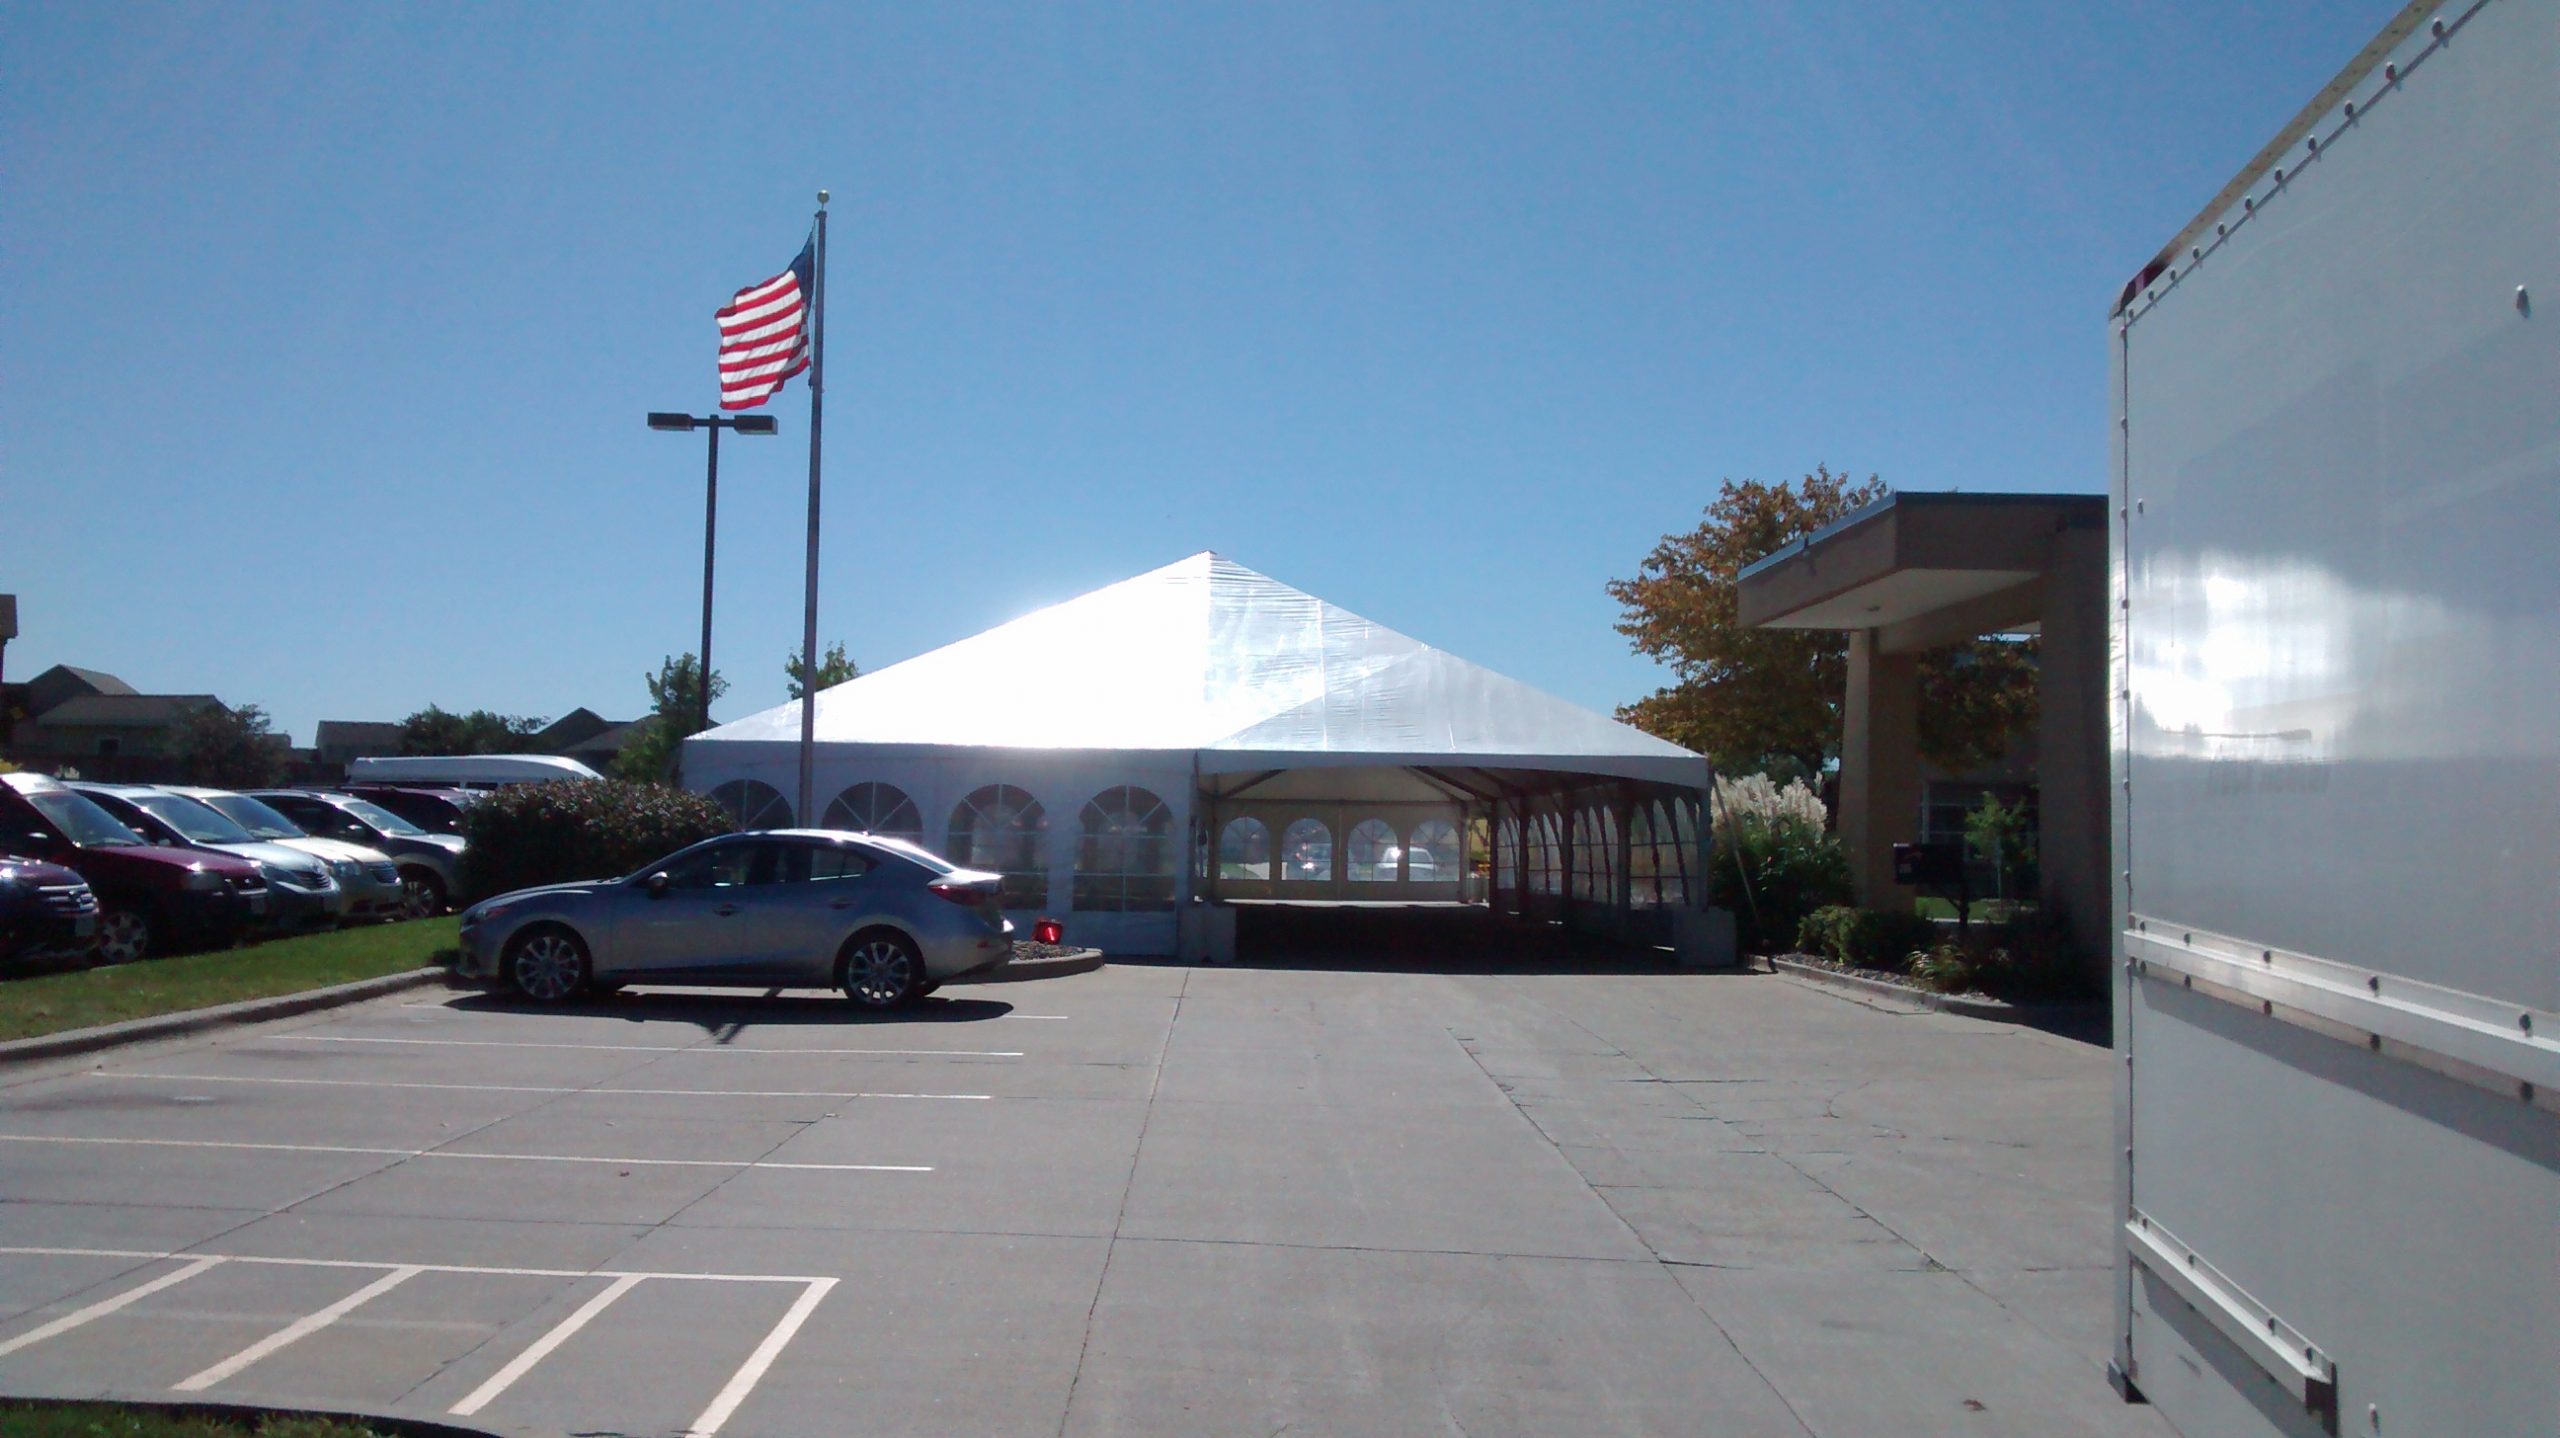 40' x 100' hybrid tent setup in parking lot with 2' x 2' x 2' blocks